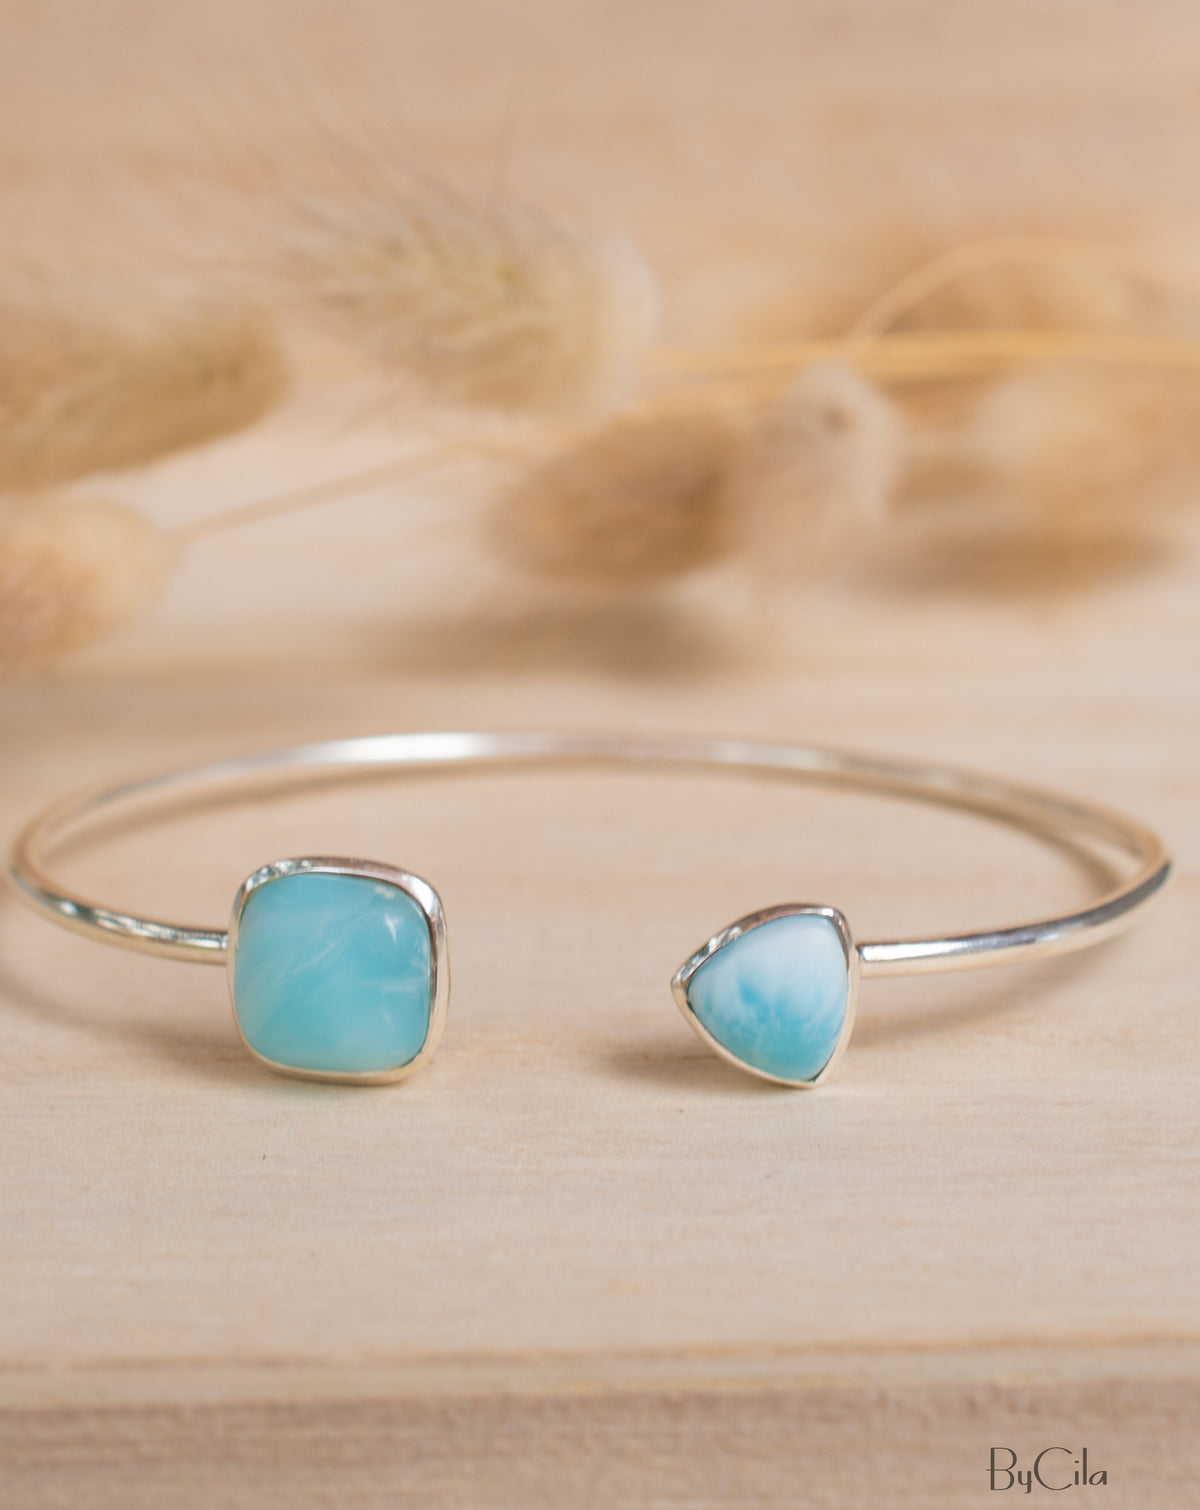 Larimar Bohemian Bangle Bracelet * Gold Plated 18k or Silver Plated * Gemstone * Gypsy * Hippie * Adjustable * Statement * Stacking *BJB005A